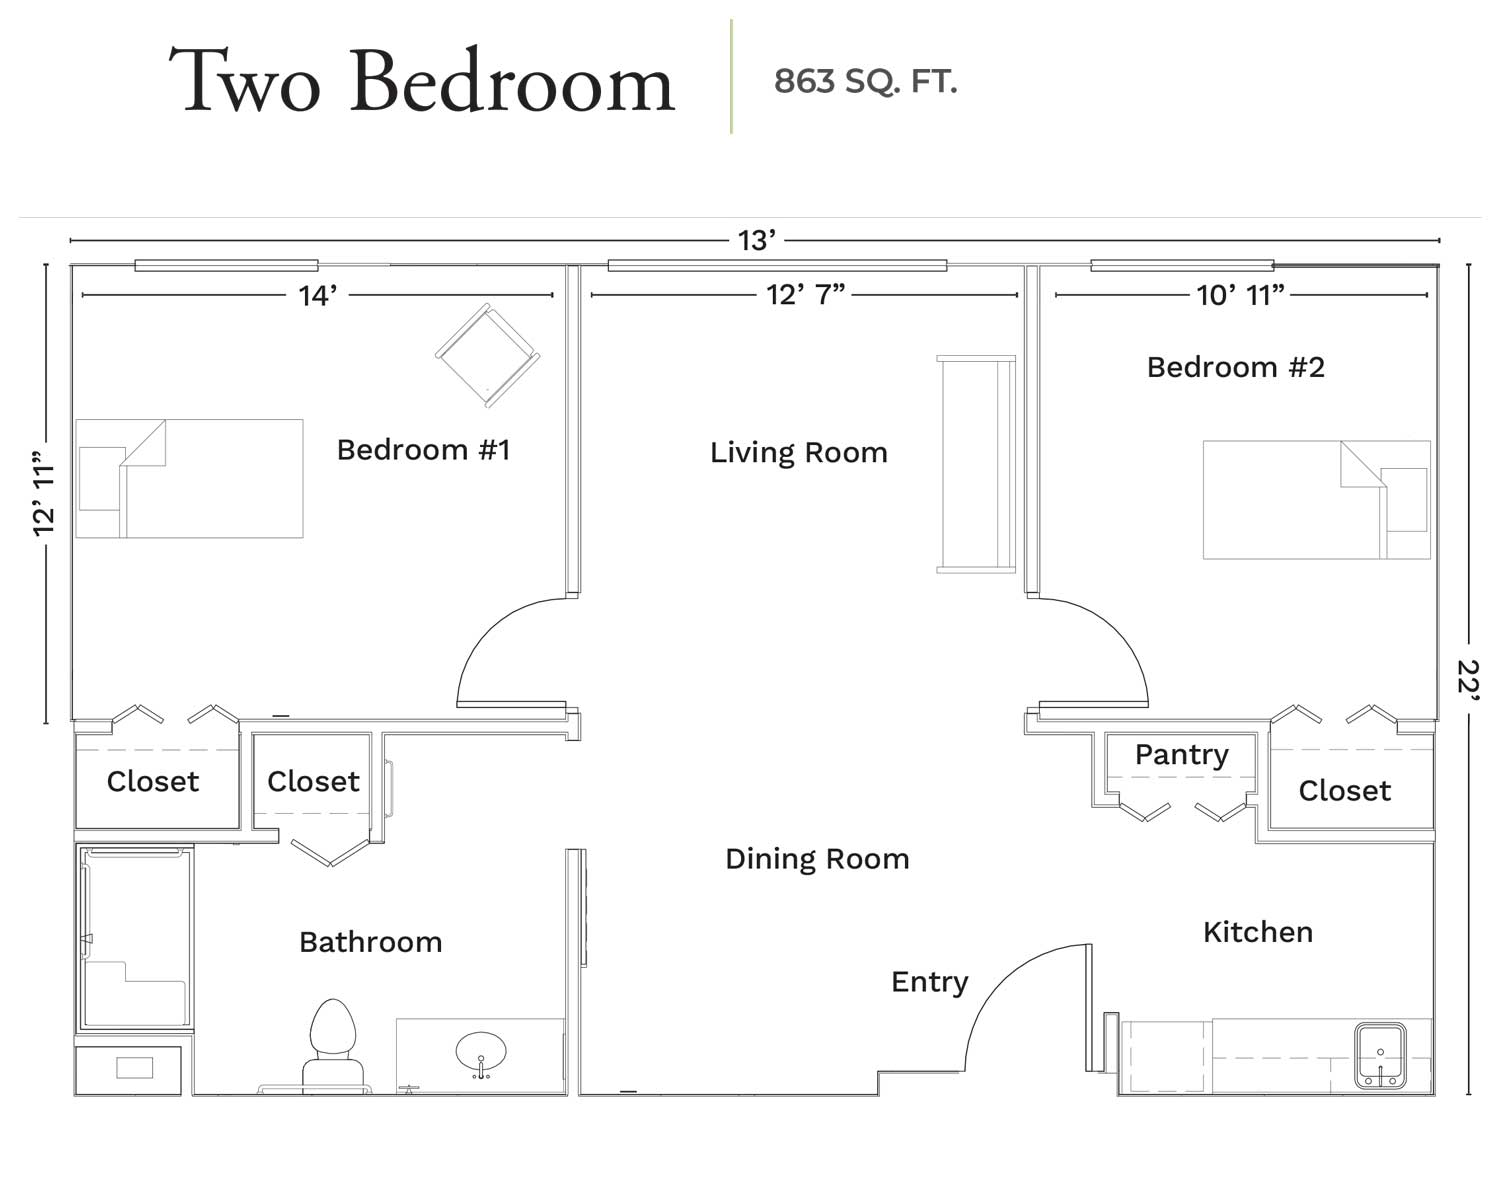 Two-bedroom apartment floor plan with labeled rooms and dimensions totaling 863 square feet.